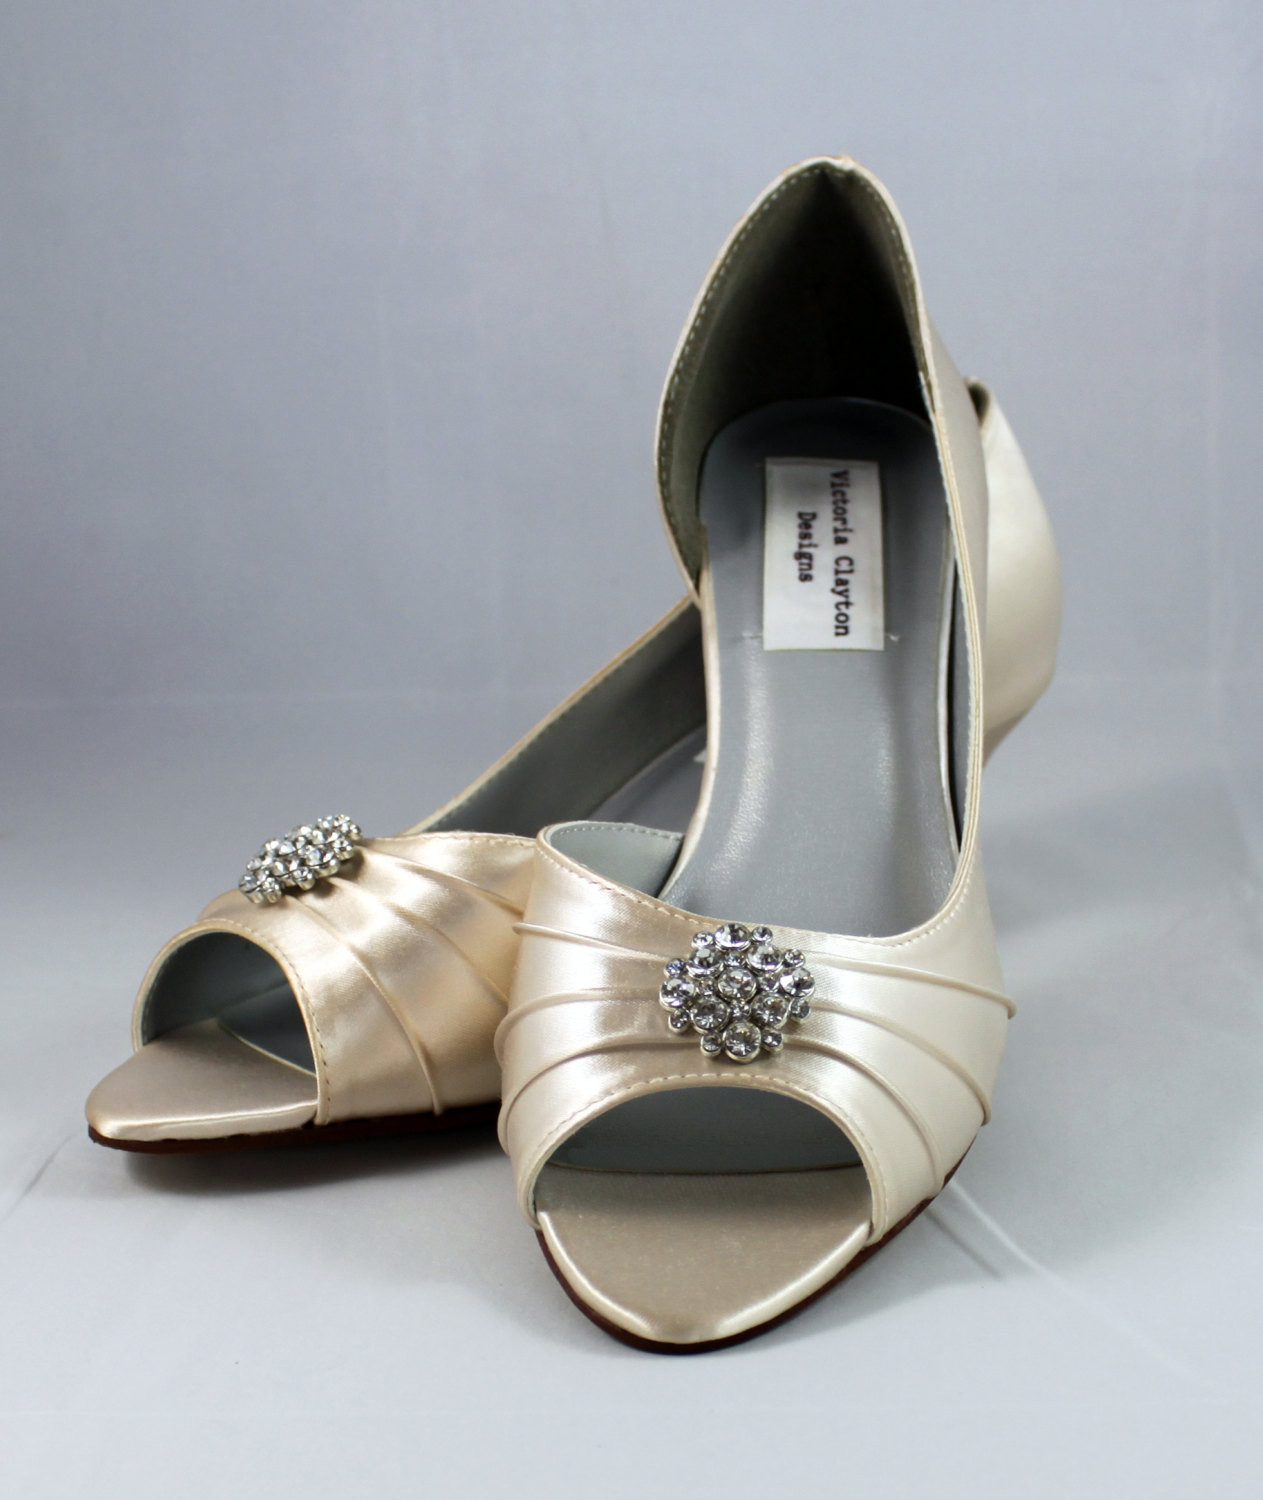 Champagne Colored Wedding Shoes
 Champagne Wedding Shoes low heel 1 75 inch by